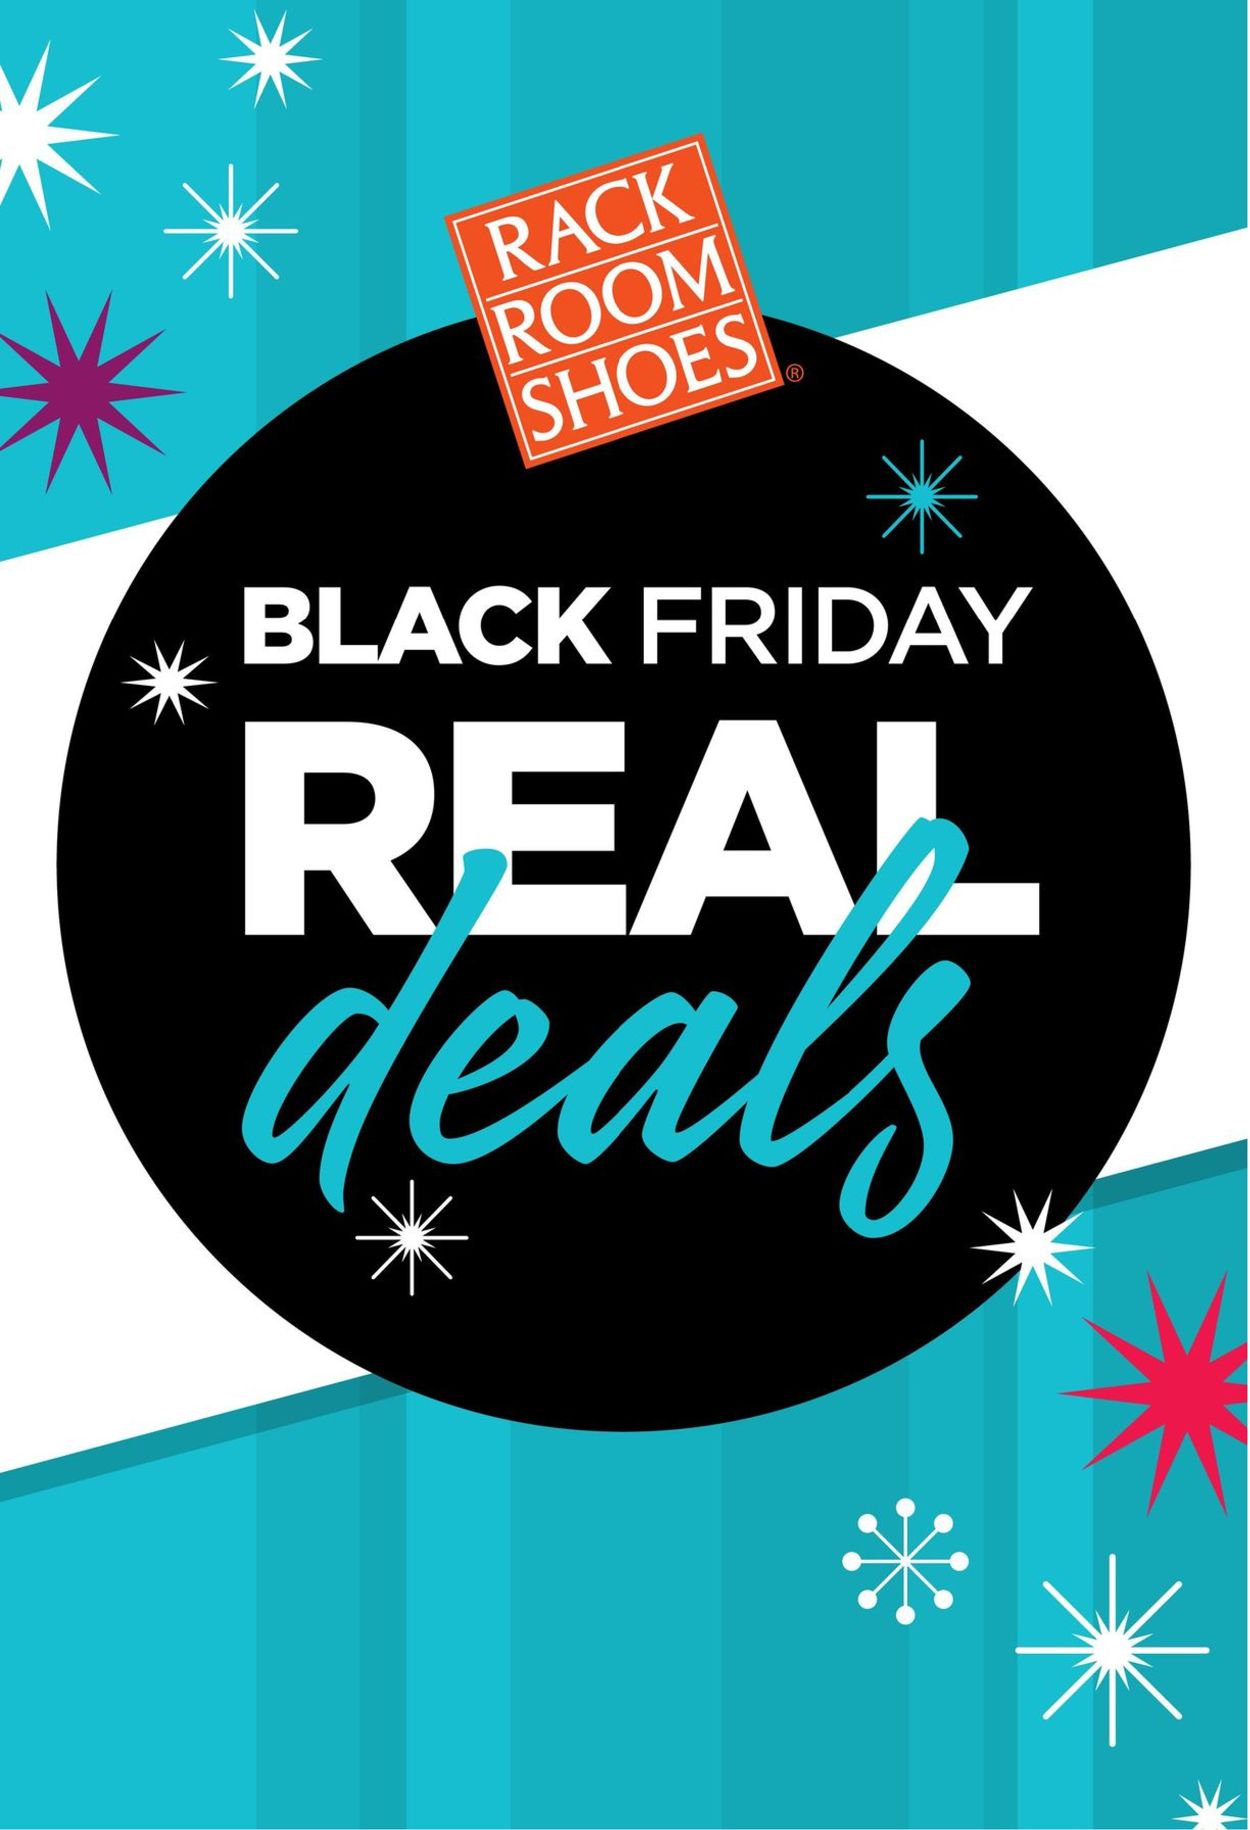 Rack Room Shoes - Black Friday Ad 2019 